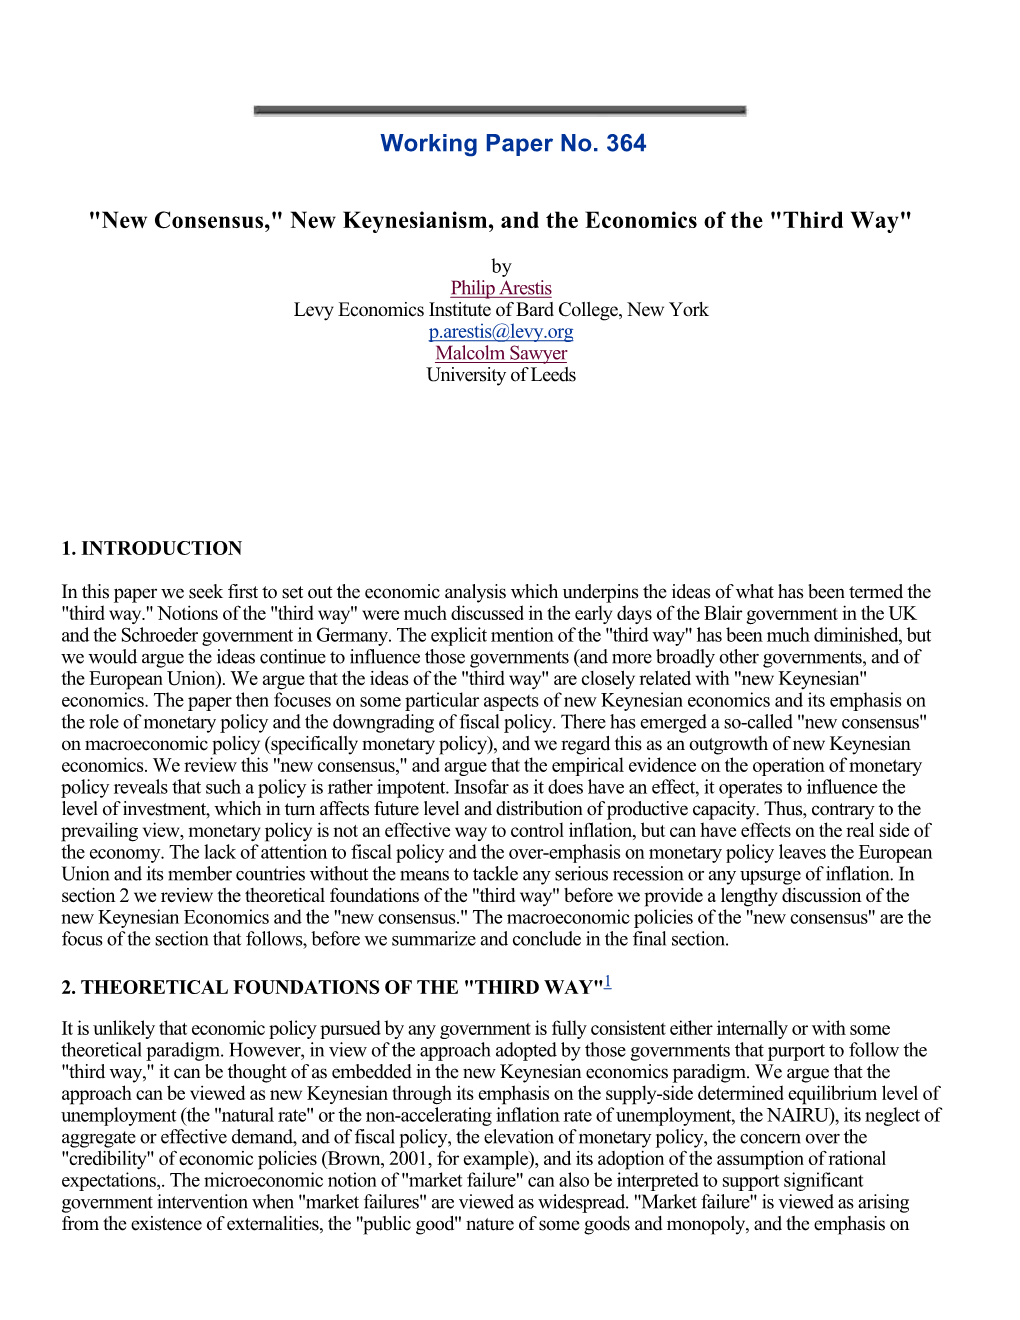 New Consensus, New Keynesianism, and the Economics of the 'Third